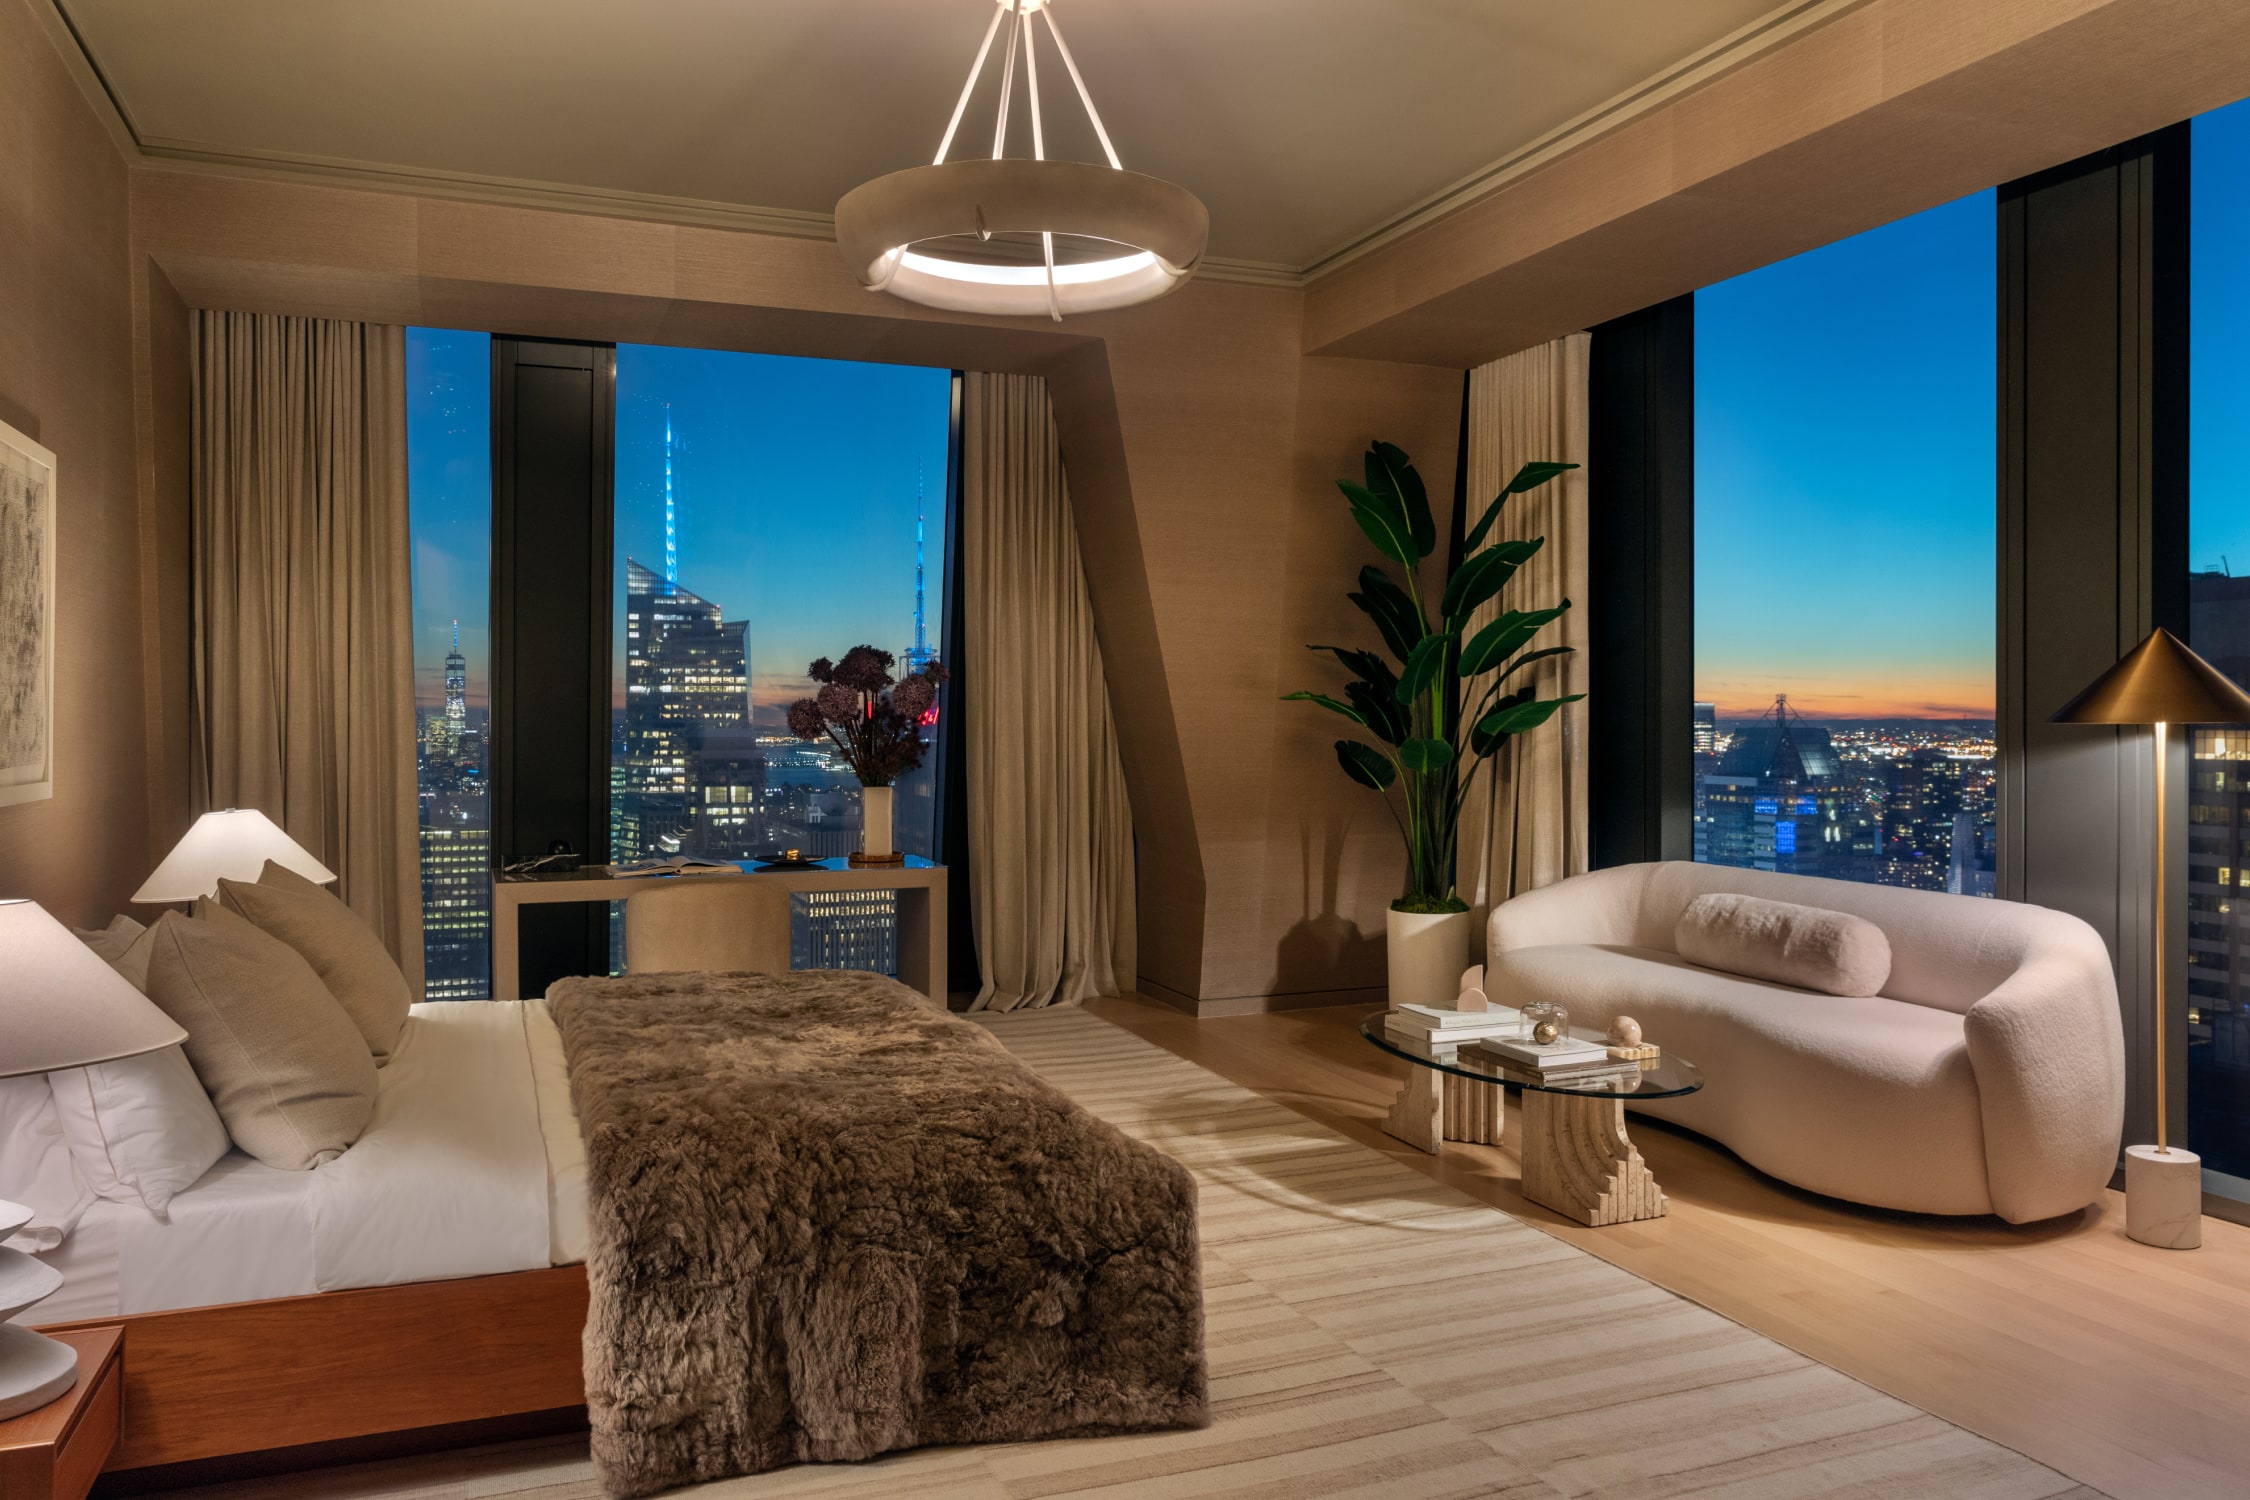 Exquisitely designed bedroom with floor to ceiling windows within a high rise penthouses for sale NYC